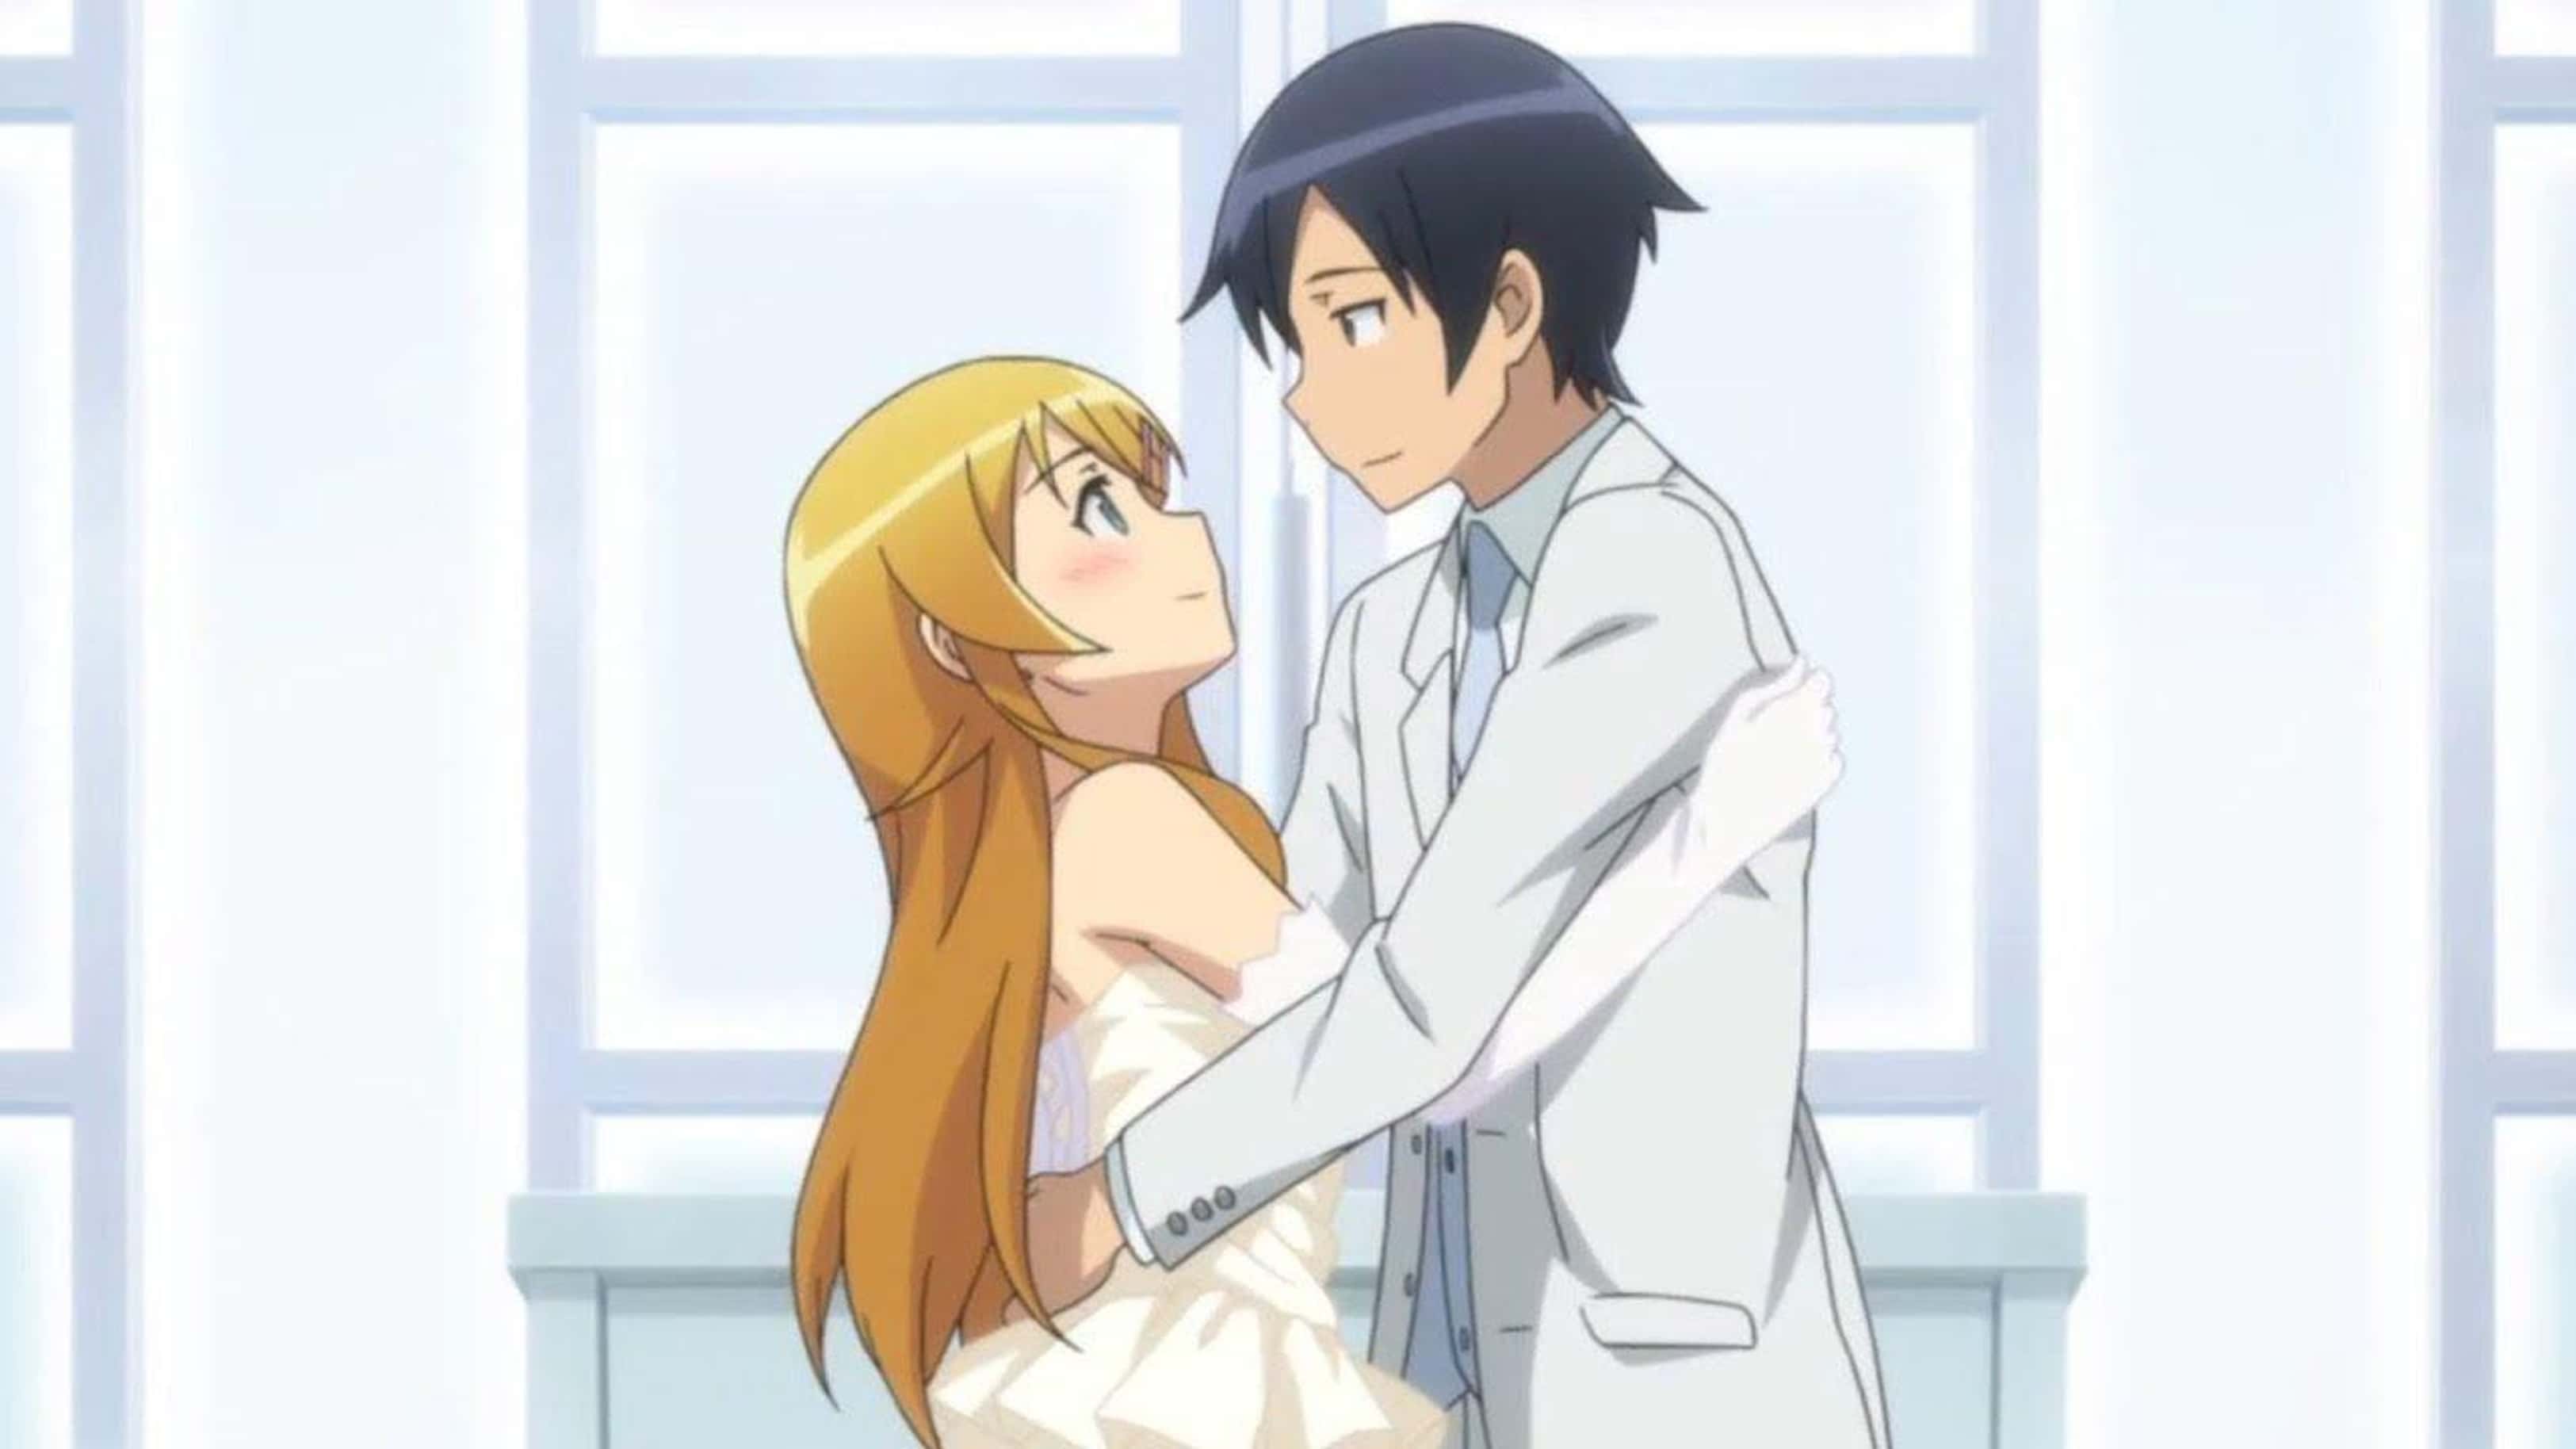 My Little Sister Can't Be This Cute - Oreimo.